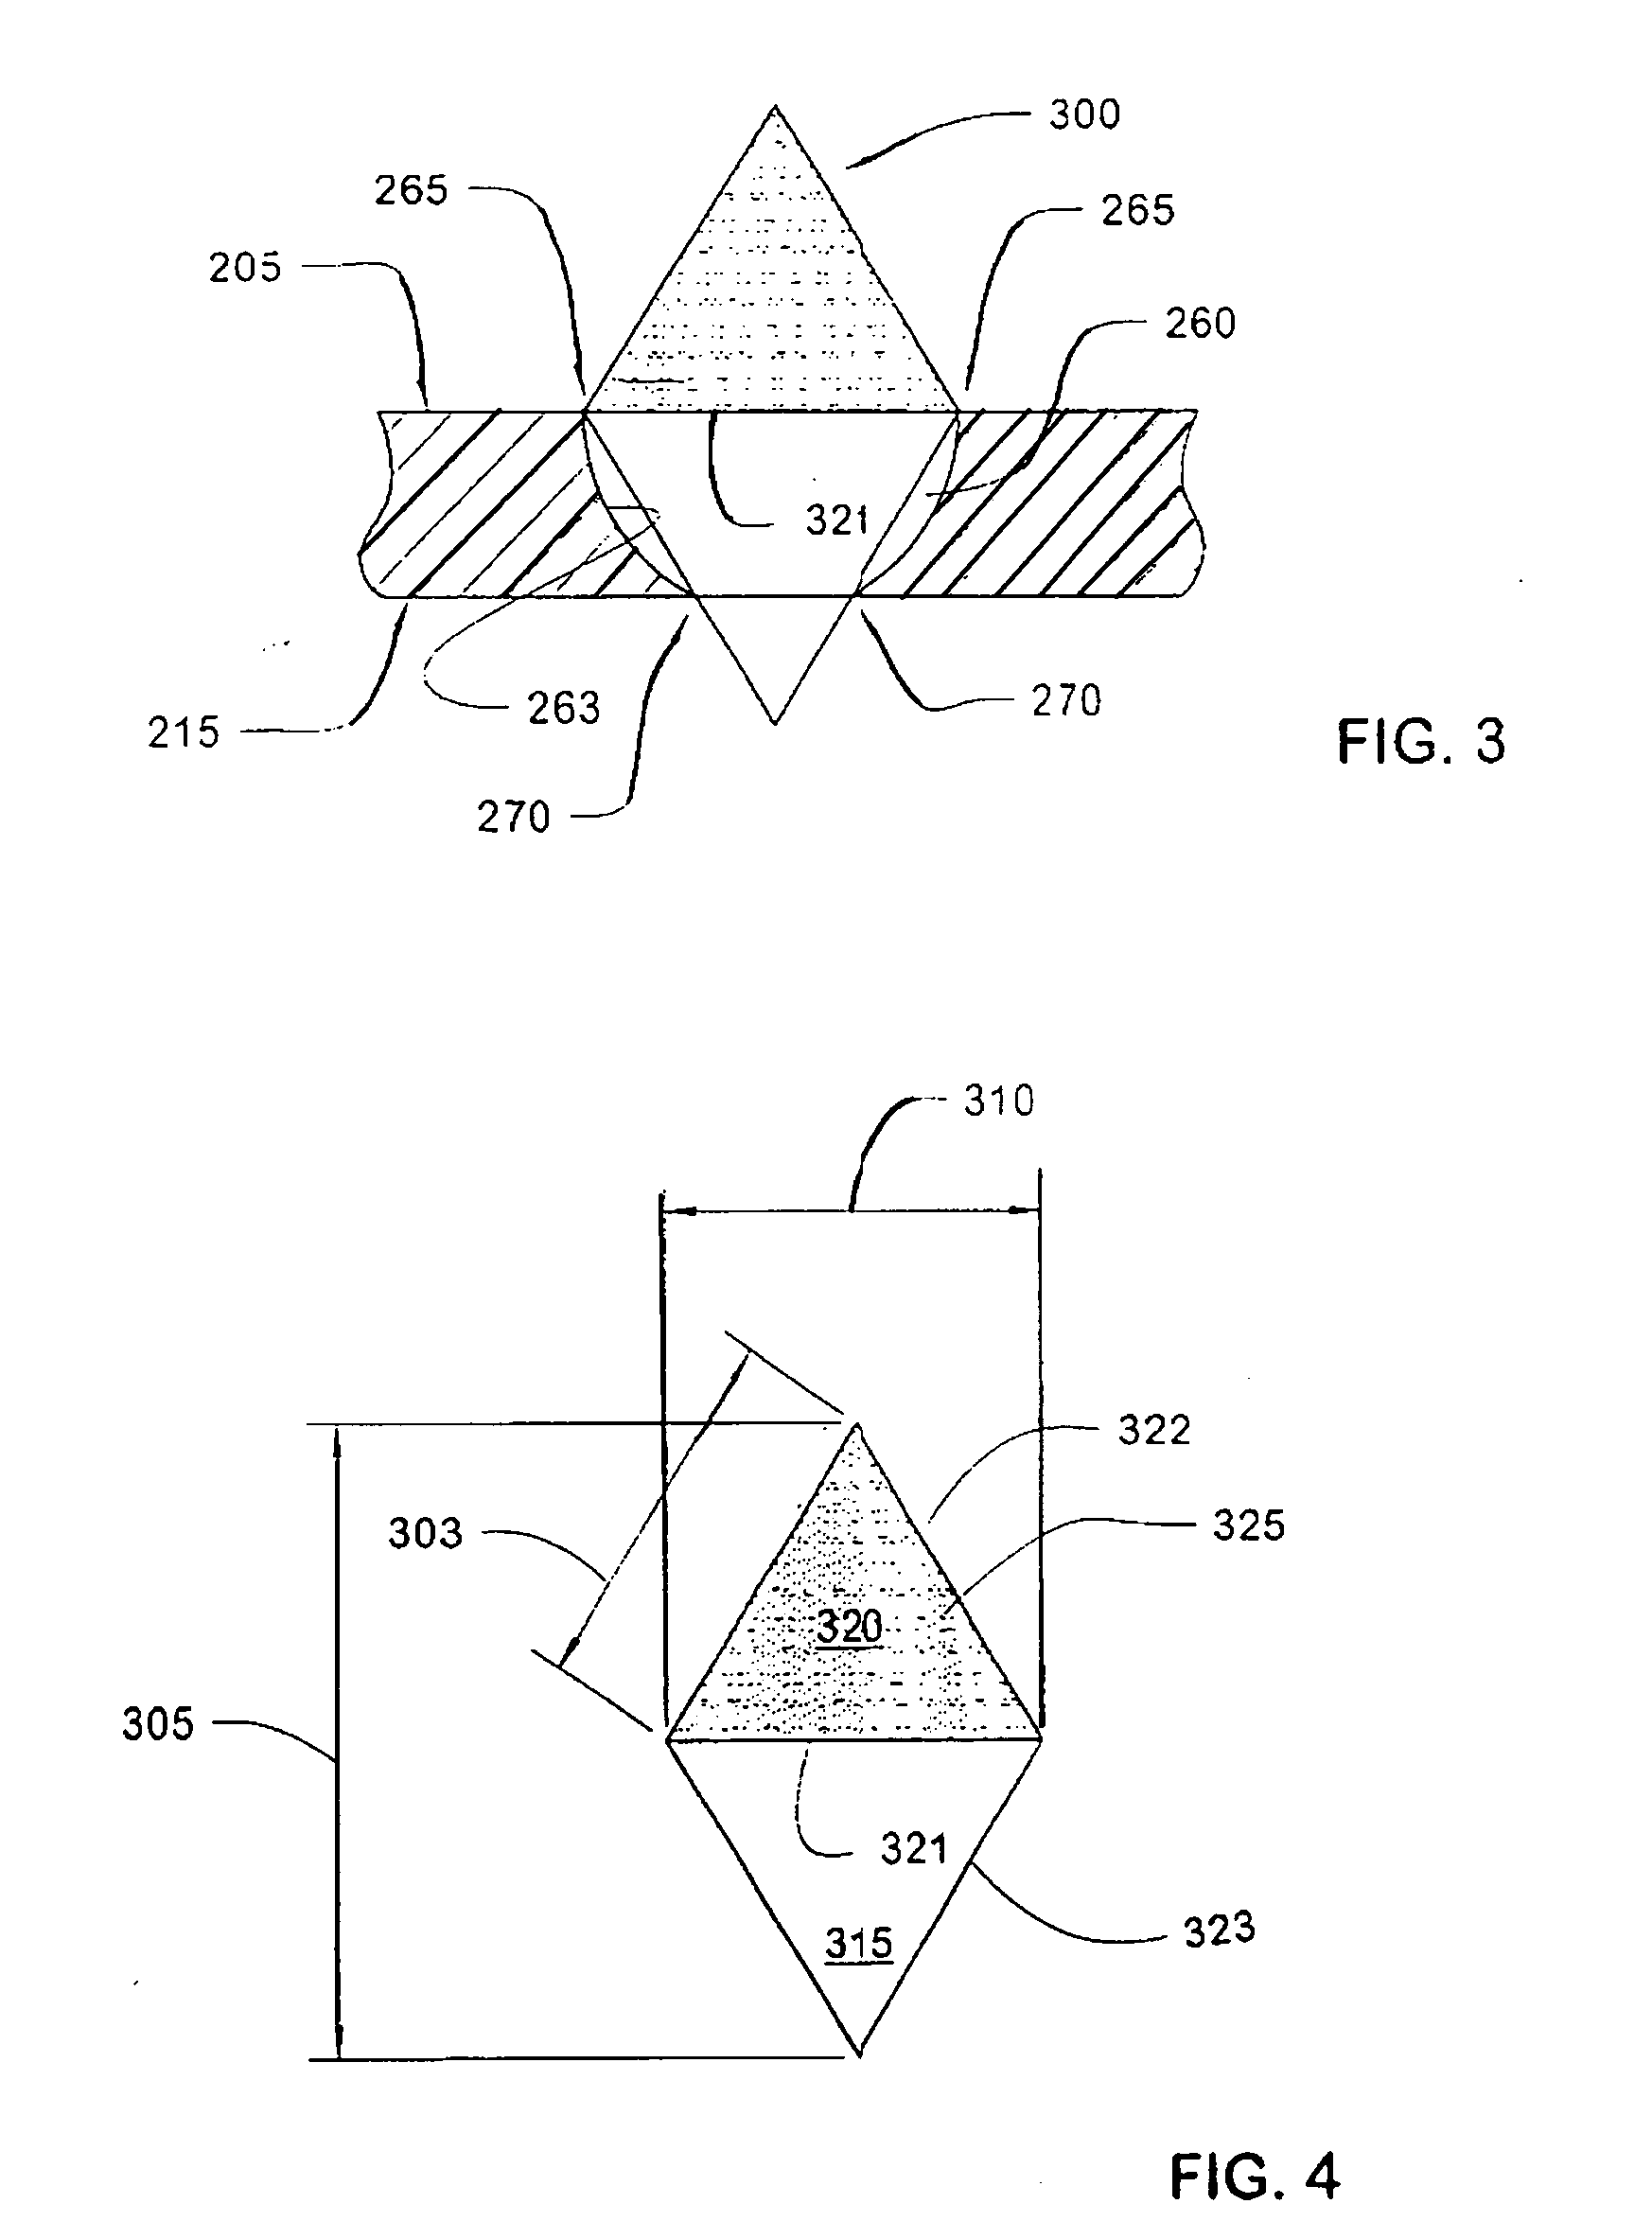 Apparatus for forming concrete and transferring loads between concrete slabs